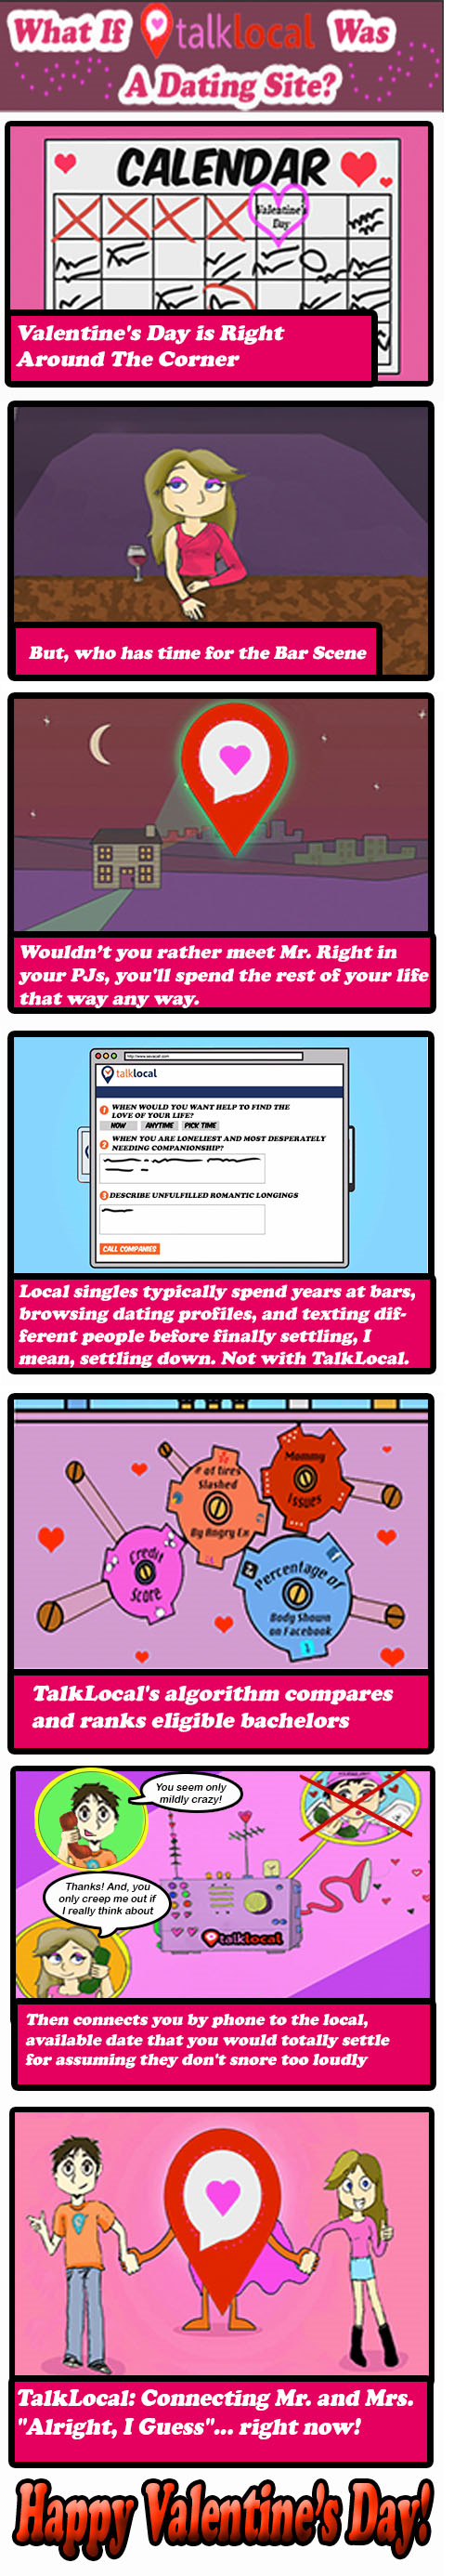 Valentin's Day Post What If TalkLocal was a Dating Site?